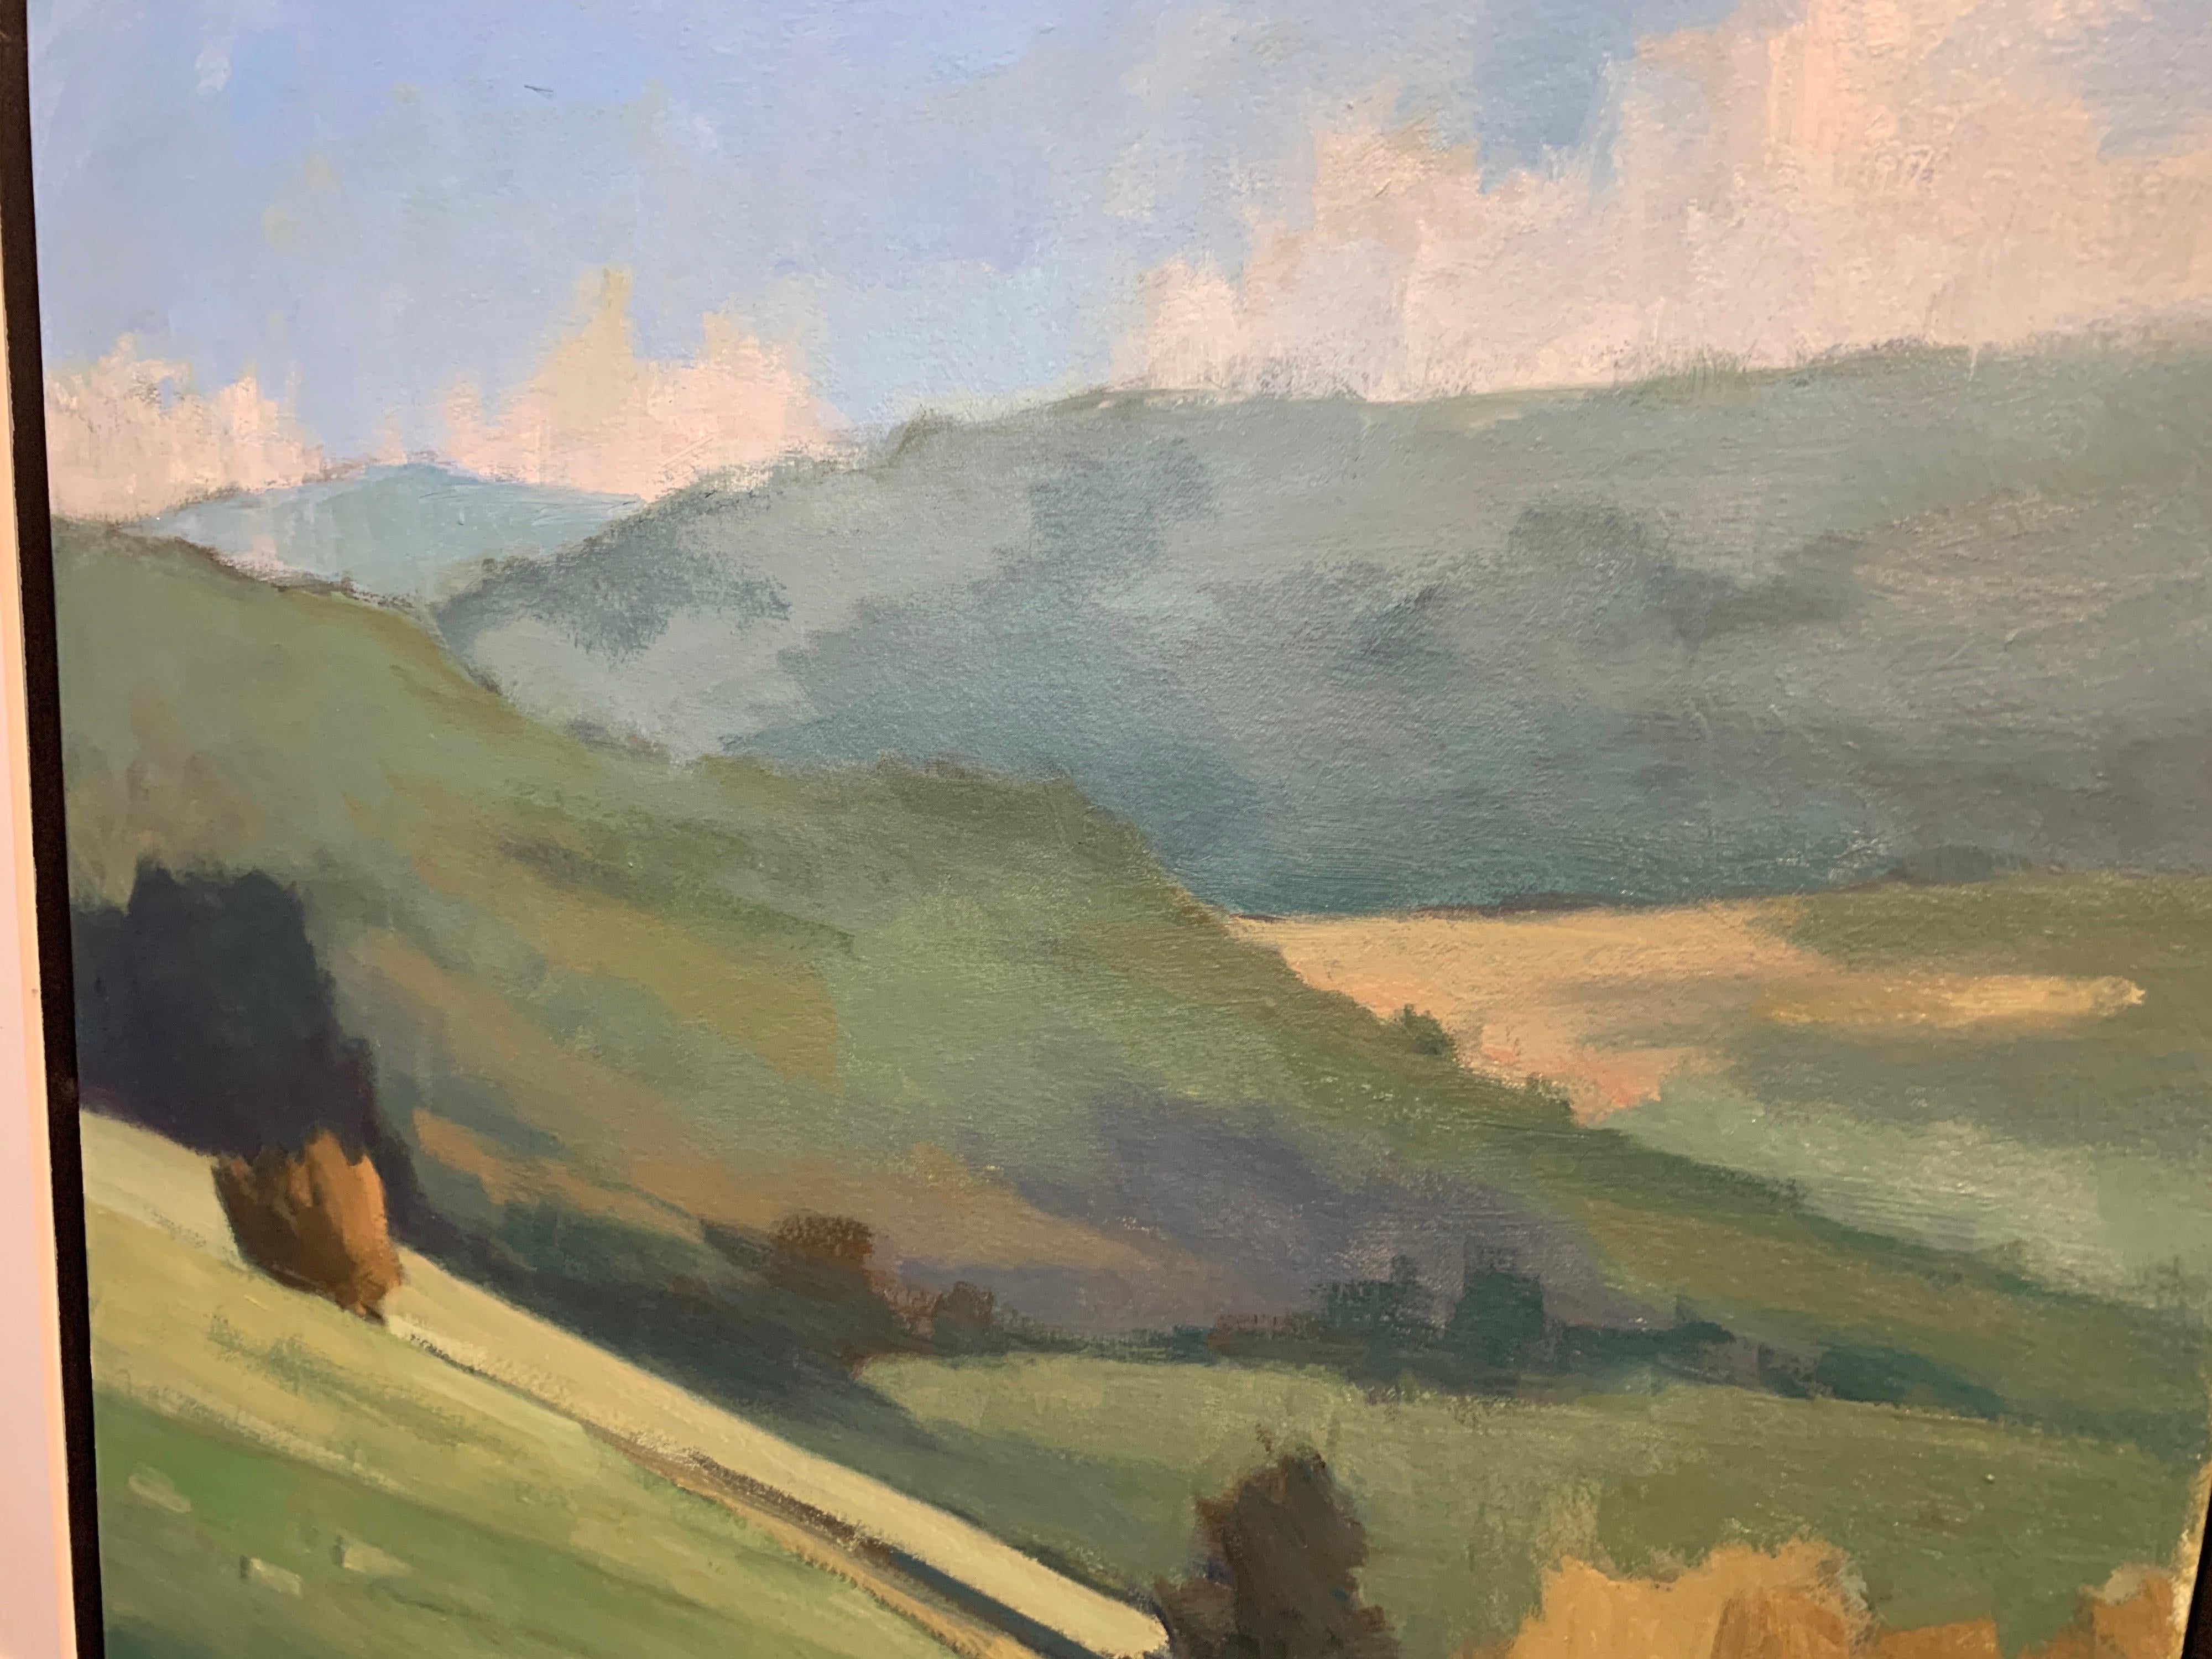 Hilly Vista by Lesley Powell, Square Oil on Canvas Landscape 5